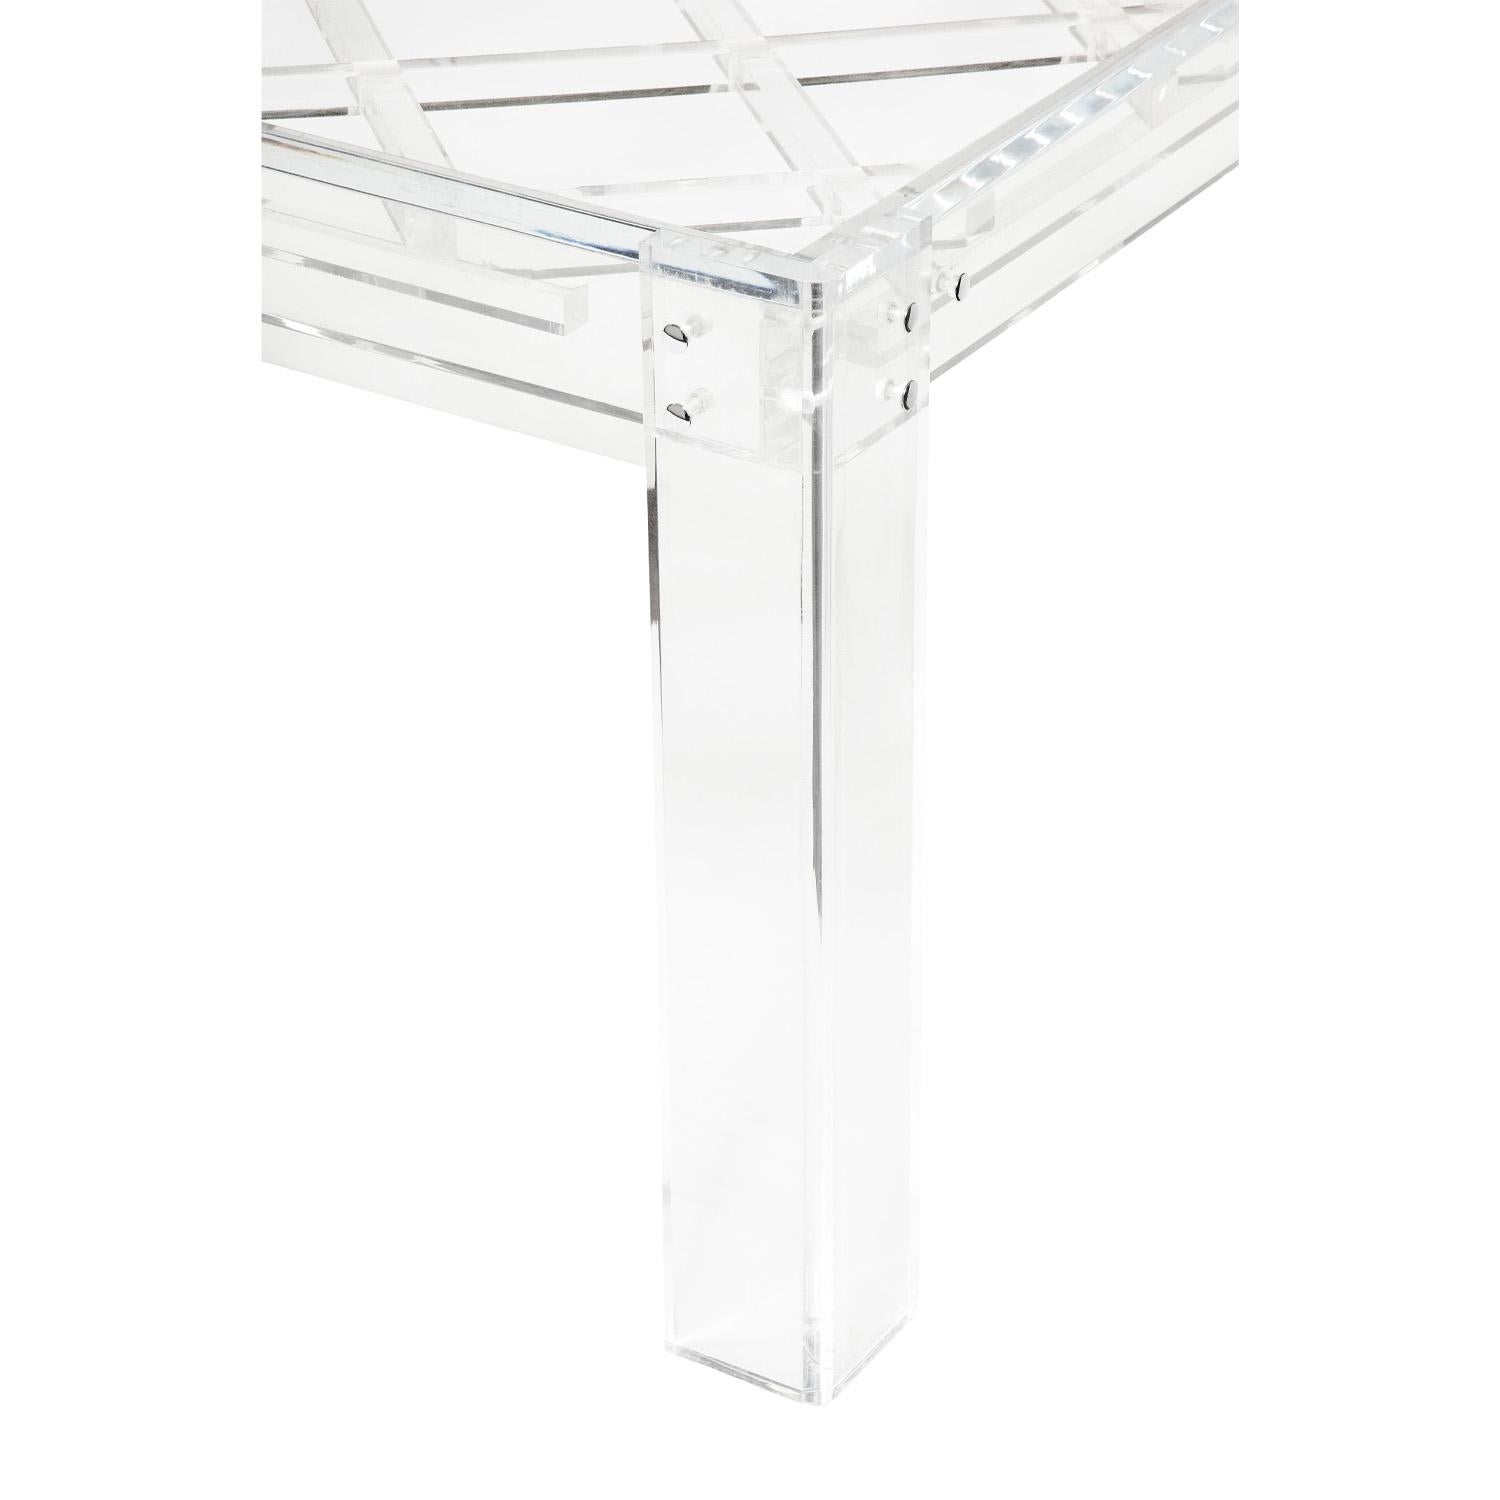 American Exceptional Thick Lucite Dining Table with Criss-Cross Design 1970s For Sale